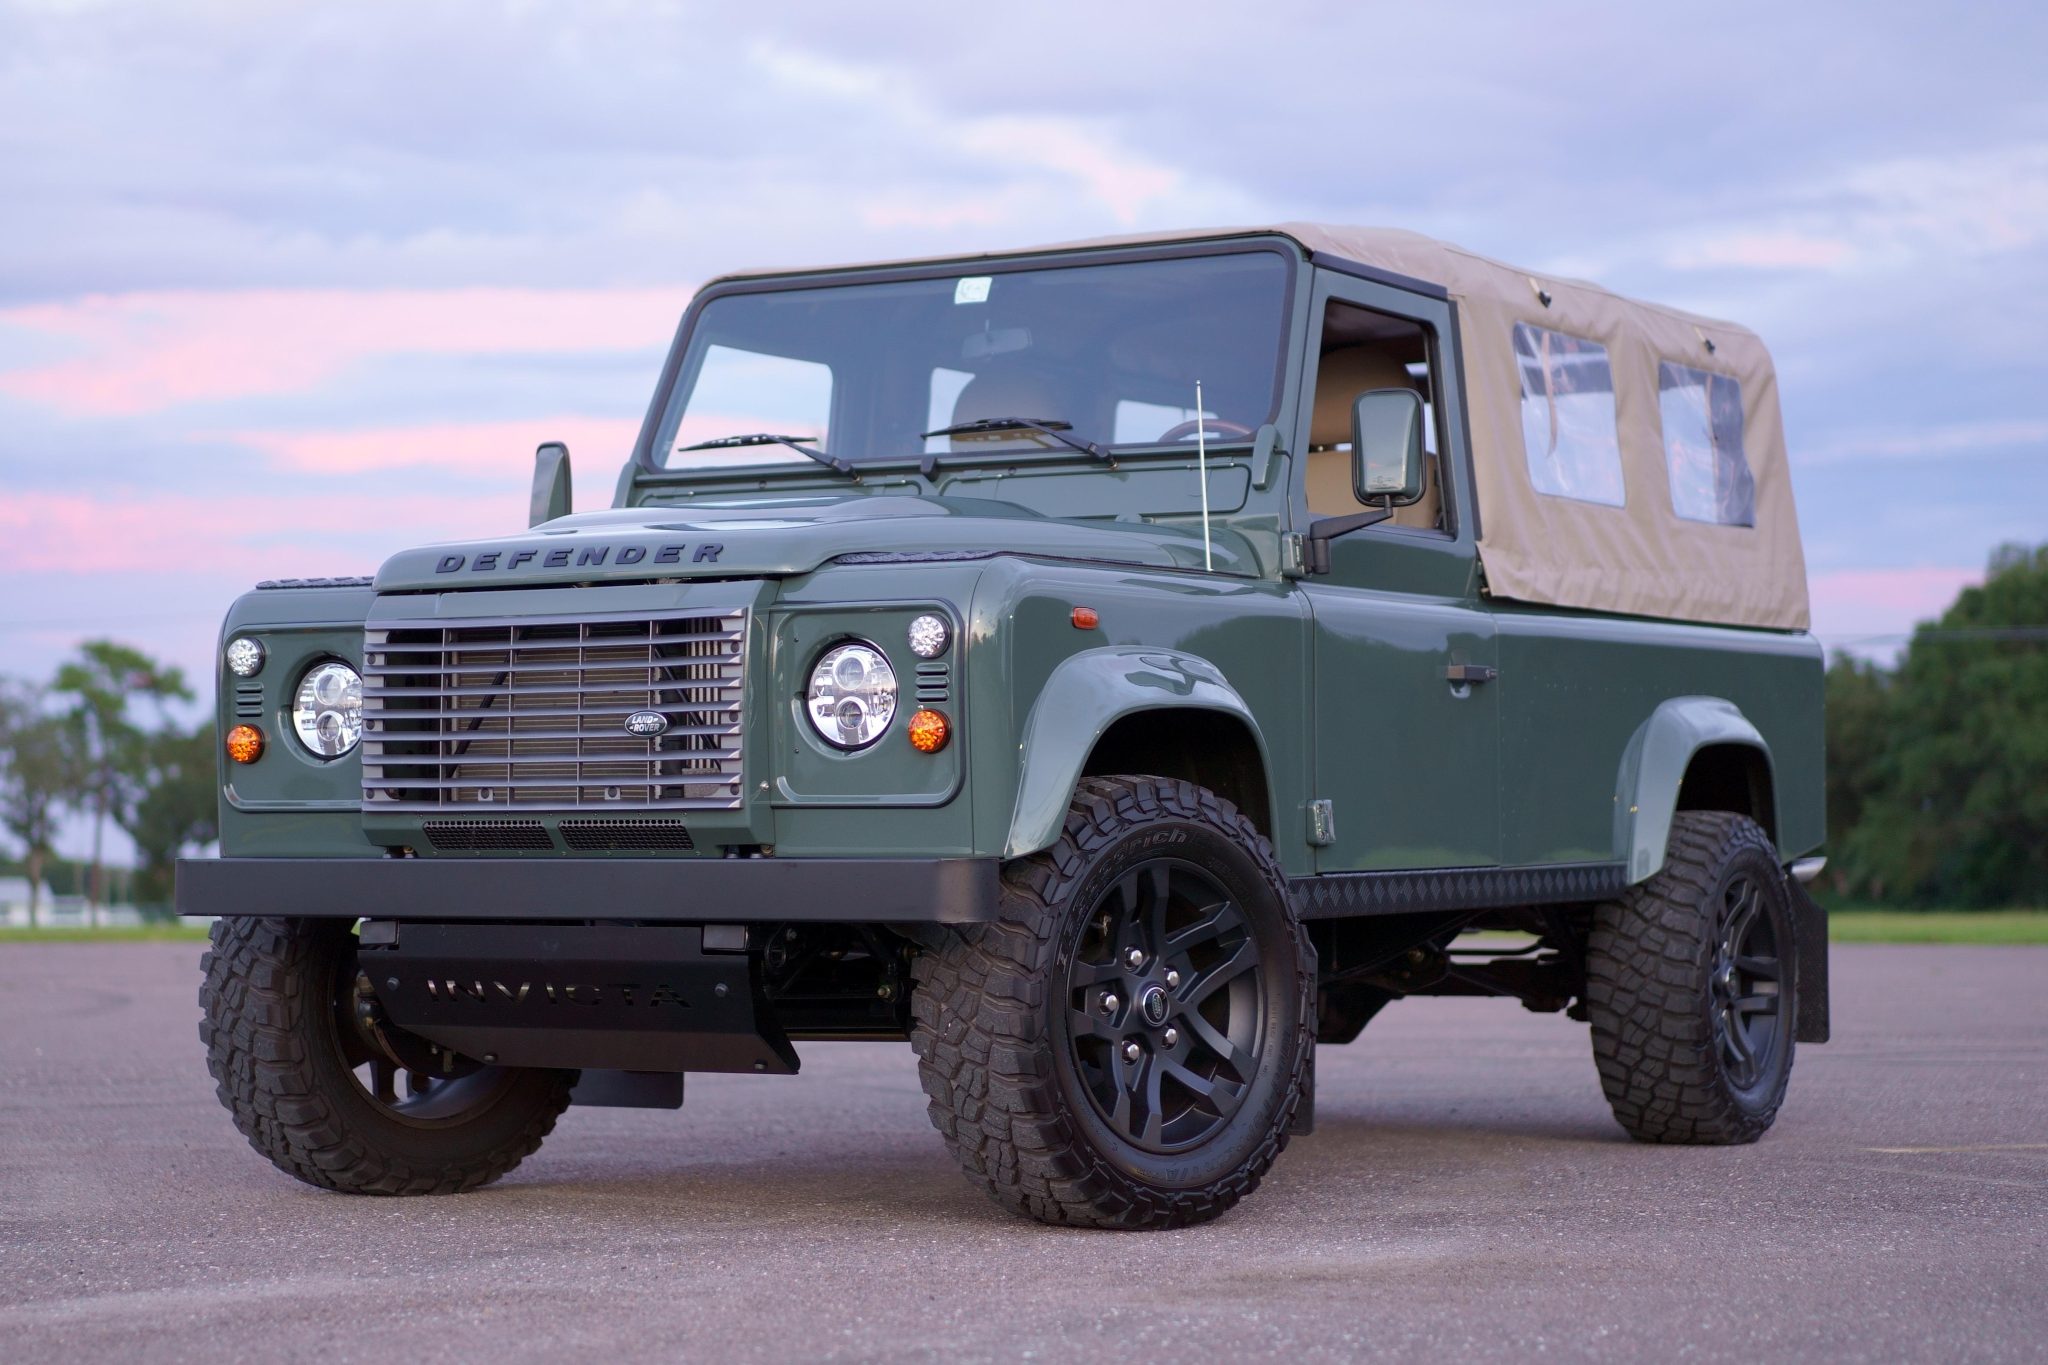 Used Invicta 1995 Land Rover Defender 110 300Tdi 5-Speed Review